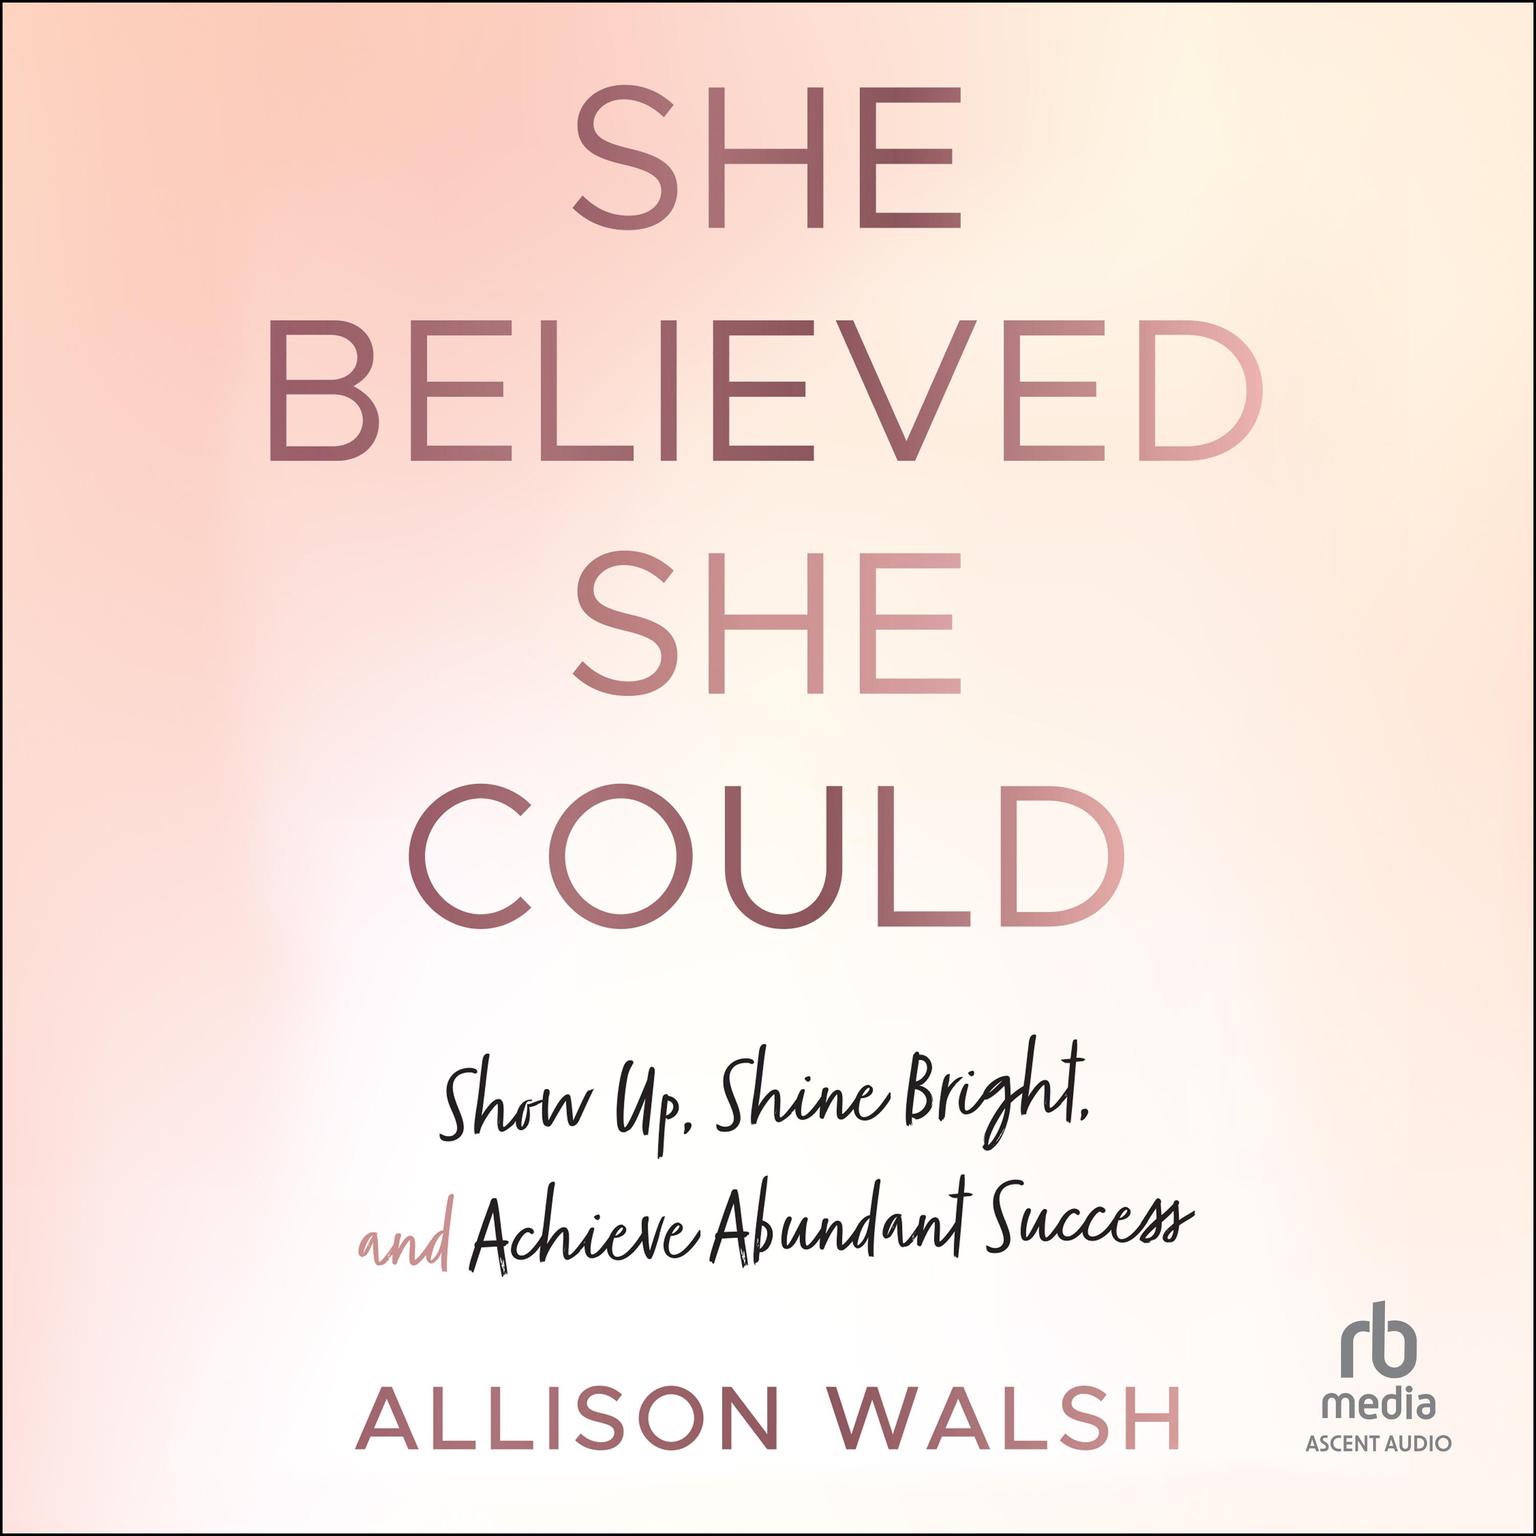 She Believed She Could: Show Up, Shine Bright, and Achieve Abundant Success Audiobook, by Allison Walsh